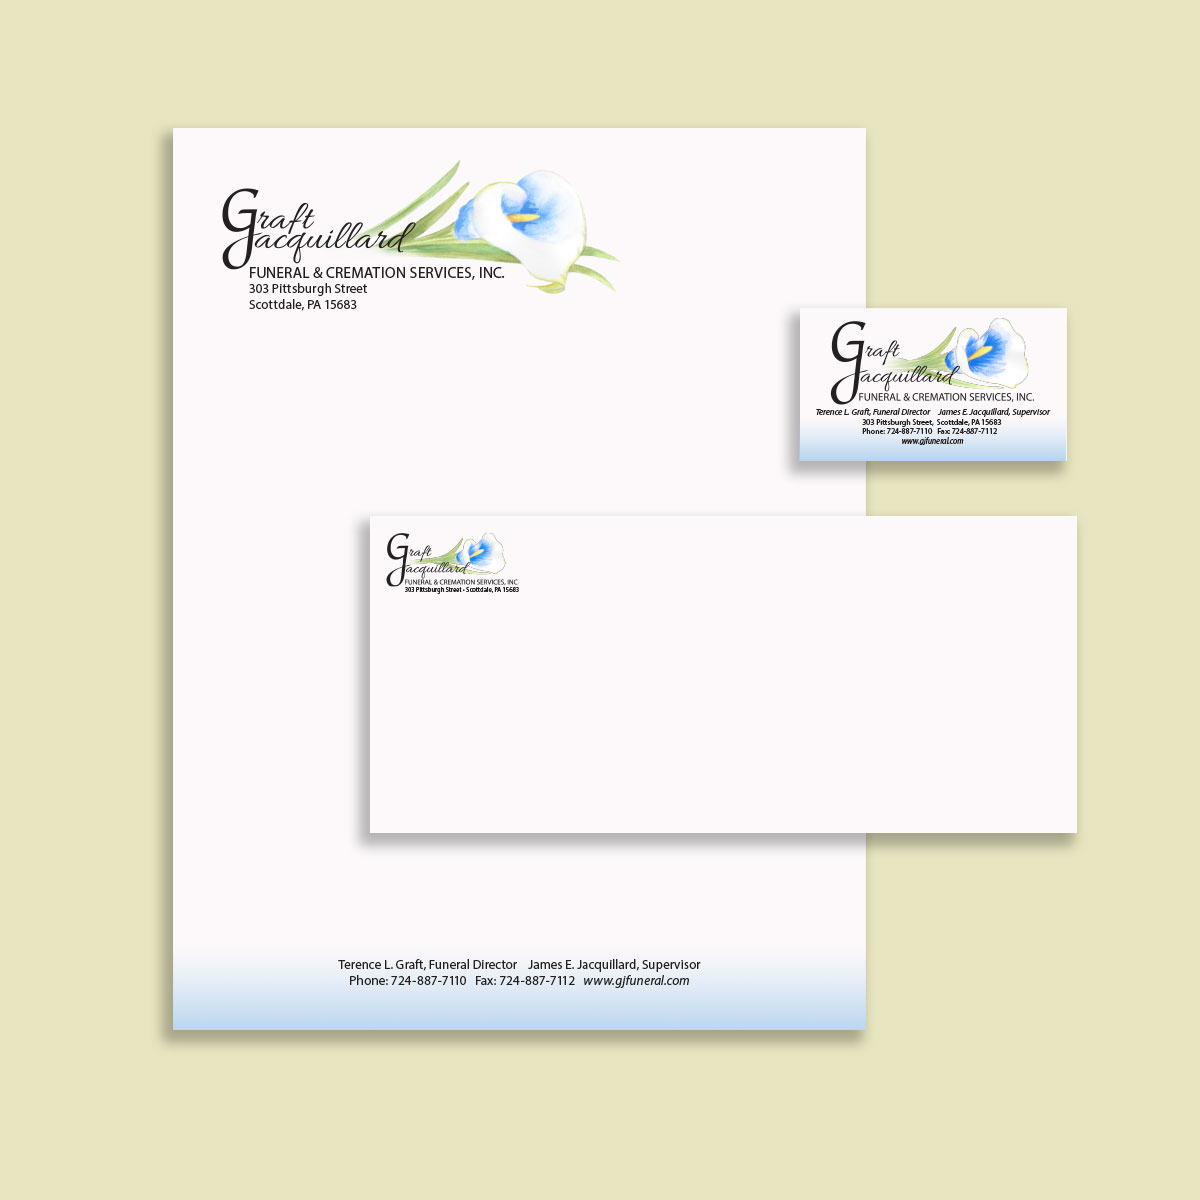 New Branding for Graft-Jacquillard Funeral & Cremation Services, Inc.